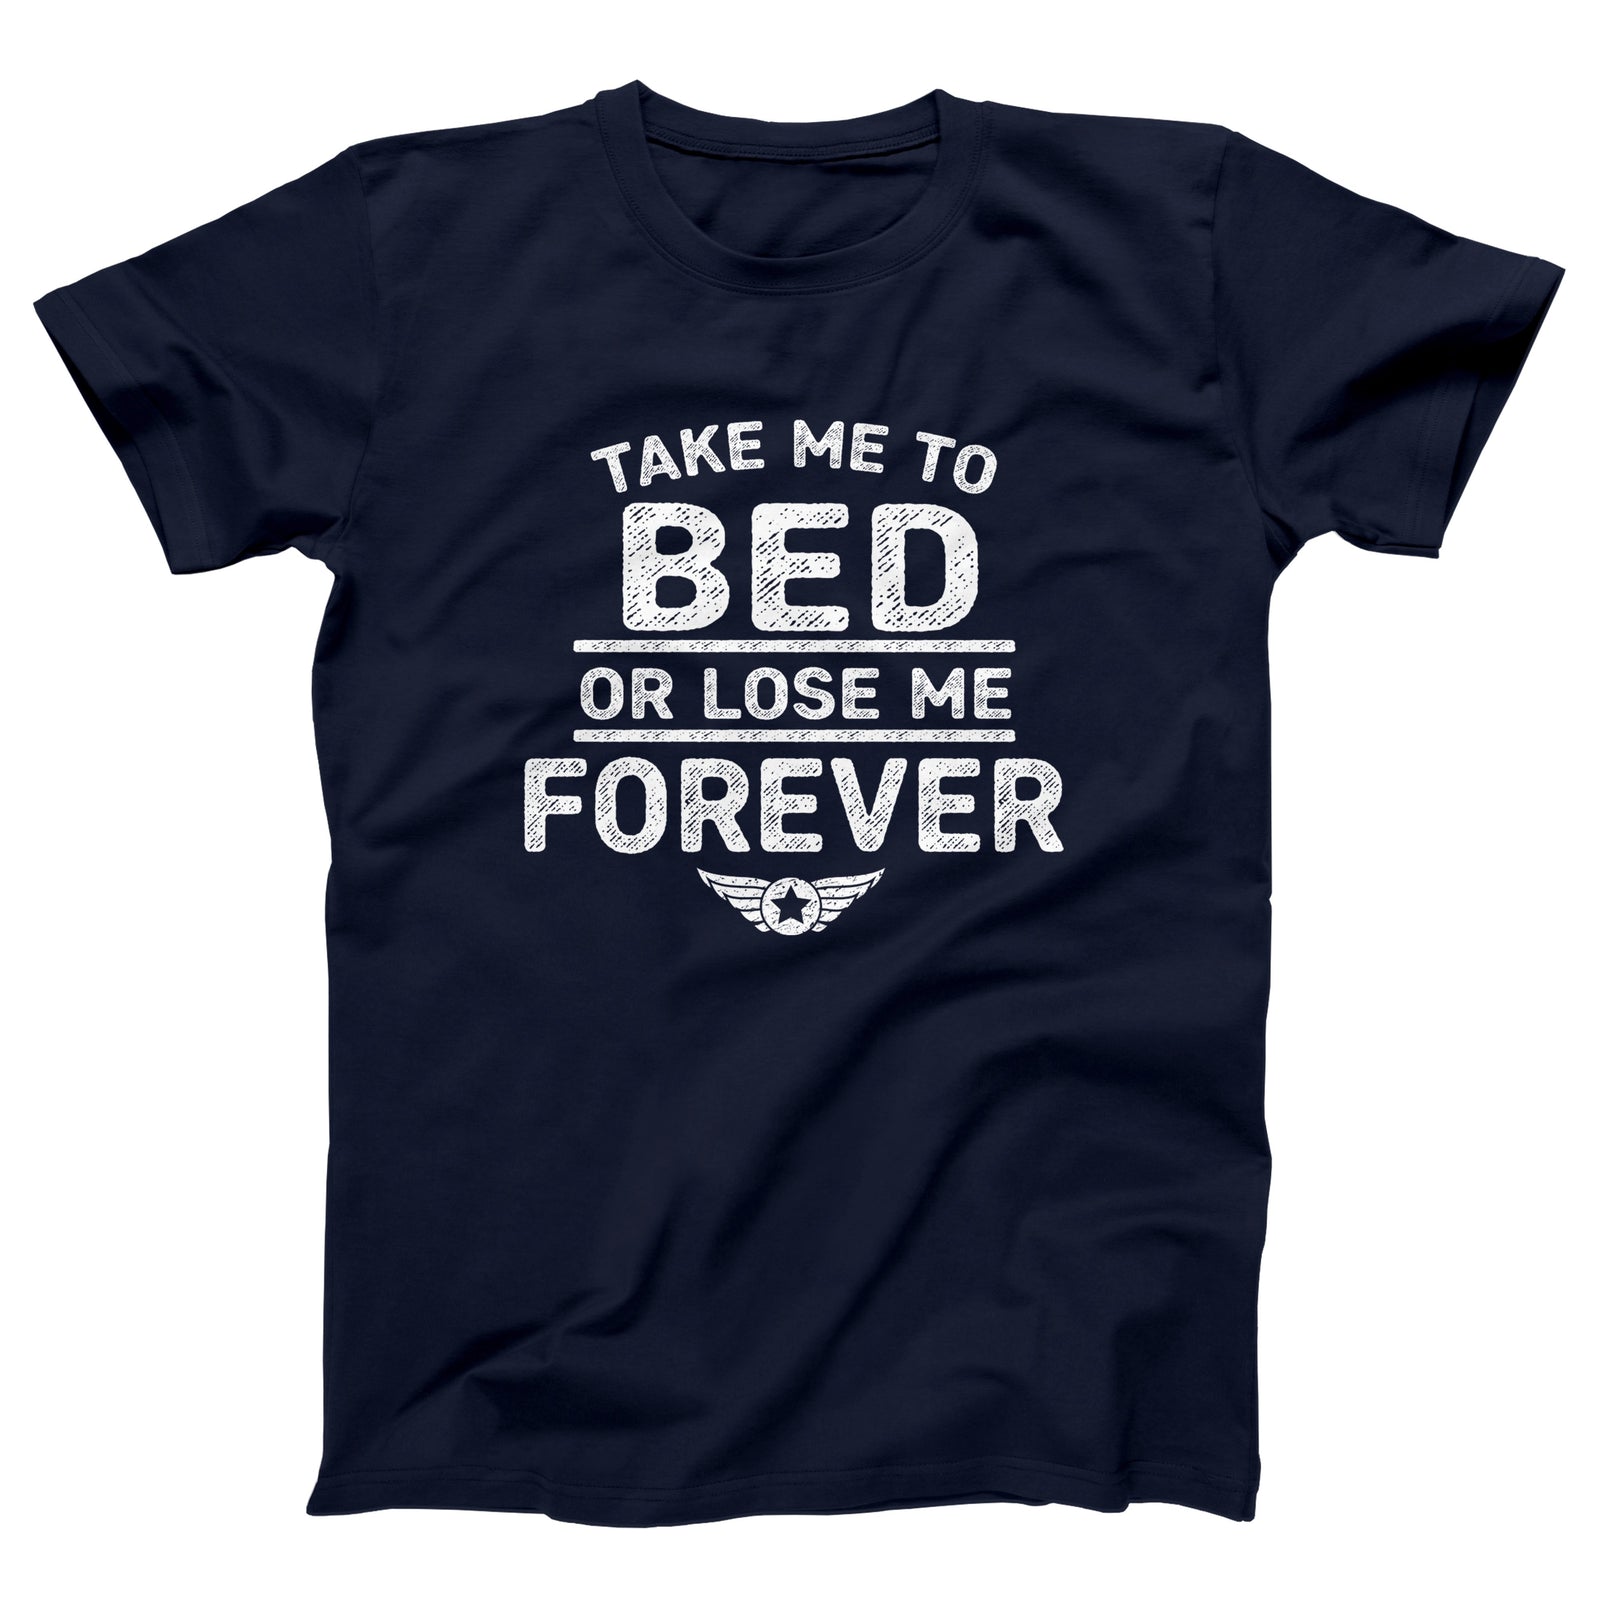 //cdn.shopify.com/s/files/1/0274/2488/2766/products/take-me-to-bed-or-lose-me-forever-menunisex-t-shirt-210627_5000x.jpg?v=1644458836 5000w,
    //cdn.shopify.com/s/files/1/0274/2488/2766/products/take-me-to-bed-or-lose-me-forever-menunisex-t-shirt-210627_4500x.jpg?v=1644458836 4500w,
    //cdn.shopify.com/s/files/1/0274/2488/2766/products/take-me-to-bed-or-lose-me-forever-menunisex-t-shirt-210627_4000x.jpg?v=1644458836 4000w,
    //cdn.shopify.com/s/files/1/0274/2488/2766/products/take-me-to-bed-or-lose-me-forever-menunisex-t-shirt-210627_3500x.jpg?v=1644458836 3500w,
    //cdn.shopify.com/s/files/1/0274/2488/2766/products/take-me-to-bed-or-lose-me-forever-menunisex-t-shirt-210627_3000x.jpg?v=1644458836 3000w,
    //cdn.shopify.com/s/files/1/0274/2488/2766/products/take-me-to-bed-or-lose-me-forever-menunisex-t-shirt-210627_2500x.jpg?v=1644458836 2500w,
    //cdn.shopify.com/s/files/1/0274/2488/2766/products/take-me-to-bed-or-lose-me-forever-menunisex-t-shirt-210627_2000x.jpg?v=1644458836 2000w,
    //cdn.shopify.com/s/files/1/0274/2488/2766/products/take-me-to-bed-or-lose-me-forever-menunisex-t-shirt-210627_1800x.jpg?v=1644458836 1800w,
    //cdn.shopify.com/s/files/1/0274/2488/2766/products/take-me-to-bed-or-lose-me-forever-menunisex-t-shirt-210627_1600x.jpg?v=1644458836 1600w,
    //cdn.shopify.com/s/files/1/0274/2488/2766/products/take-me-to-bed-or-lose-me-forever-menunisex-t-shirt-210627_1400x.jpg?v=1644458836 1400w,
    //cdn.shopify.com/s/files/1/0274/2488/2766/products/take-me-to-bed-or-lose-me-forever-menunisex-t-shirt-210627_1200x.jpg?v=1644458836 1200w,
    //cdn.shopify.com/s/files/1/0274/2488/2766/products/take-me-to-bed-or-lose-me-forever-menunisex-t-shirt-210627_1000x.jpg?v=1644458836 1000w,
    //cdn.shopify.com/s/files/1/0274/2488/2766/products/take-me-to-bed-or-lose-me-forever-menunisex-t-shirt-210627_800x.jpg?v=1644458836 800w,
    //cdn.shopify.com/s/files/1/0274/2488/2766/products/take-me-to-bed-or-lose-me-forever-menunisex-t-shirt-210627_600x.jpg?v=1644458836 600w,
    //cdn.shopify.com/s/files/1/0274/2488/2766/products/take-me-to-bed-or-lose-me-forever-menunisex-t-shirt-210627_400x.jpg?v=1644458836 400w,
    //cdn.shopify.com/s/files/1/0274/2488/2766/products/take-me-to-bed-or-lose-me-forever-menunisex-t-shirt-210627_200x.jpg?v=1644458836 200w